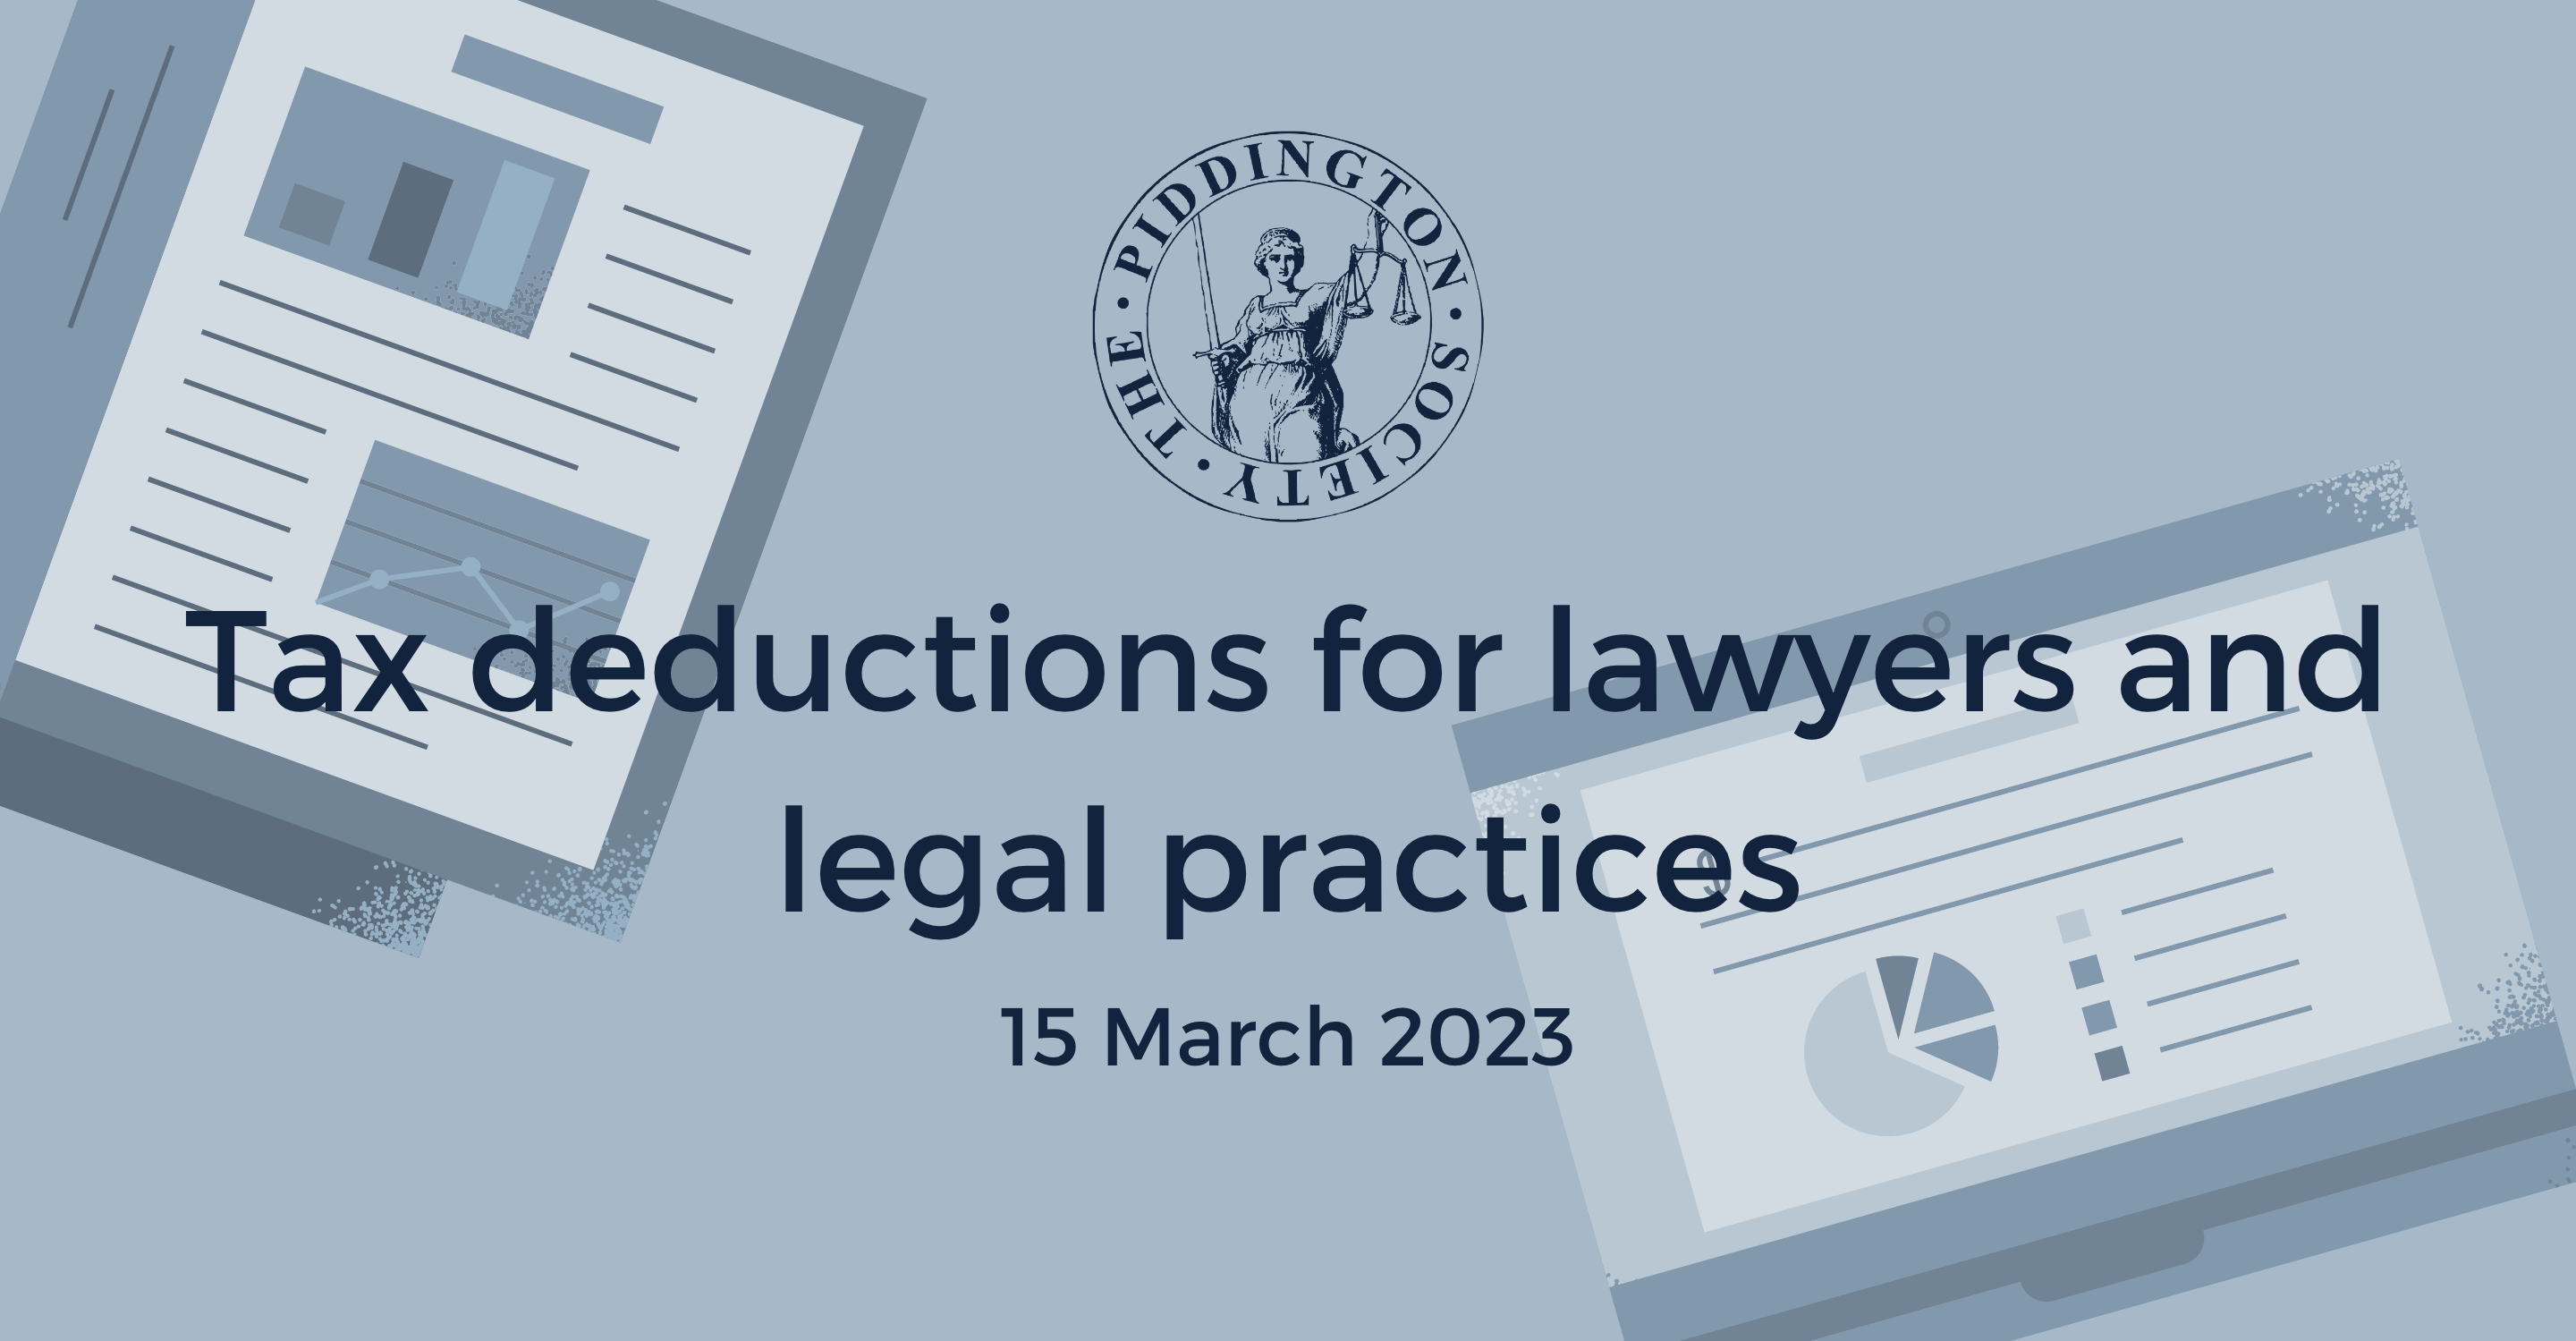 2023-tax-deductions-for-lawyers-and-legal-practices-tickets-online